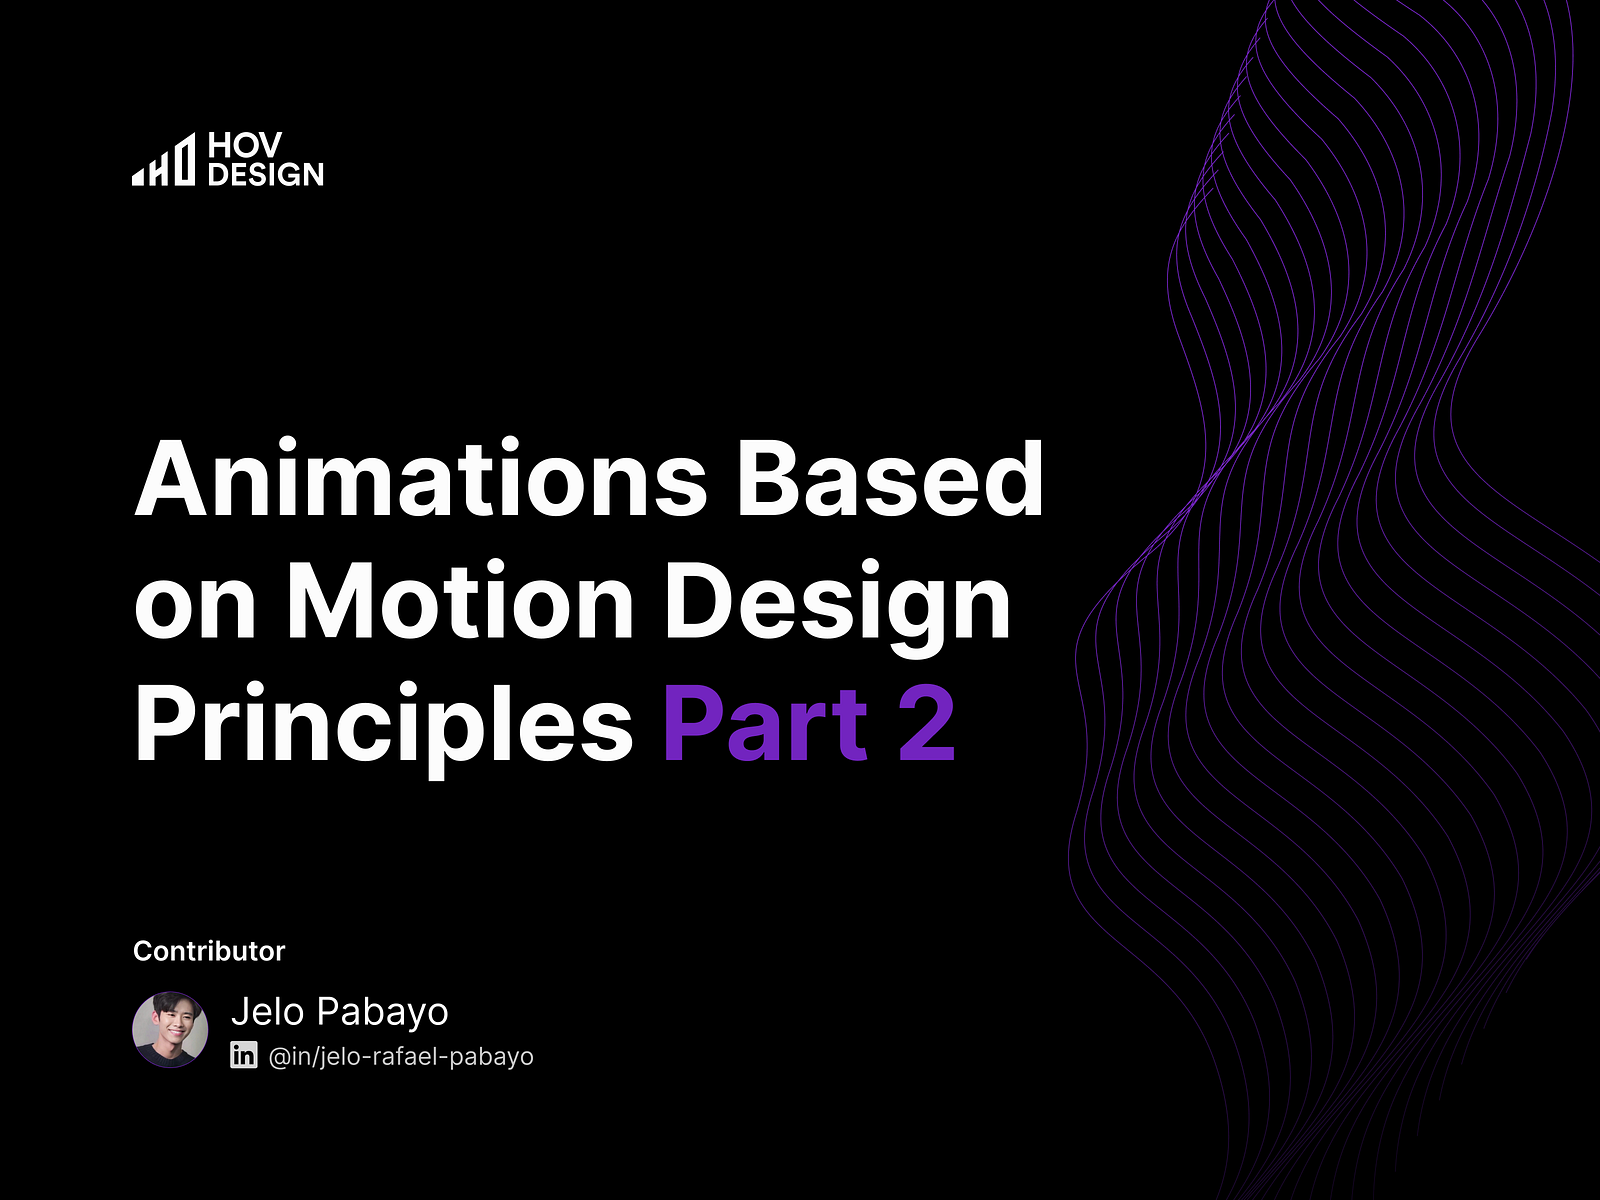 Animations Based on Motion Design Principles Part 2 by Jelo Pabayo for ...